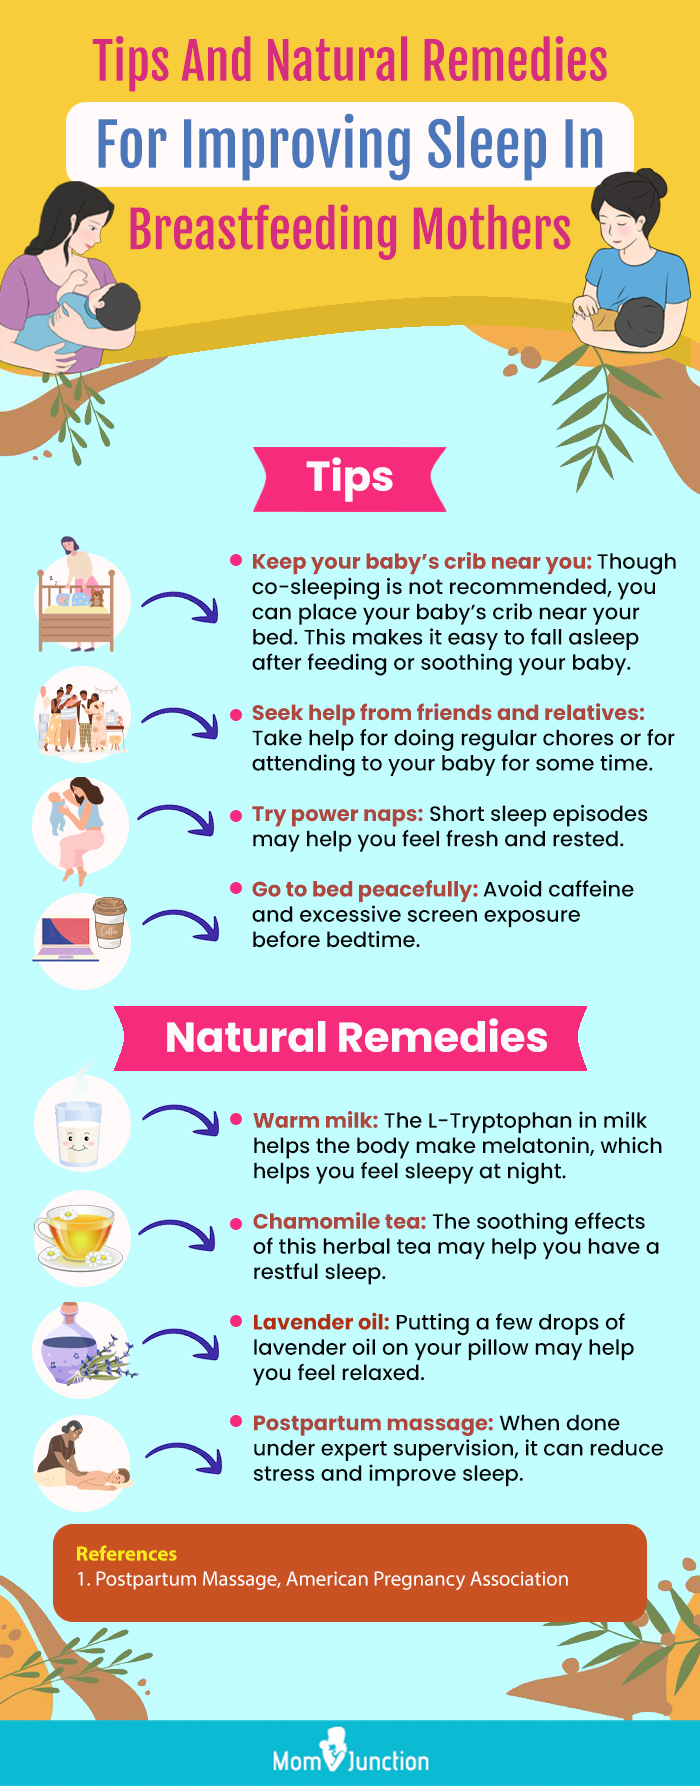 7 Ways To Help With Back Pain From Breastfeeding — Milkology®